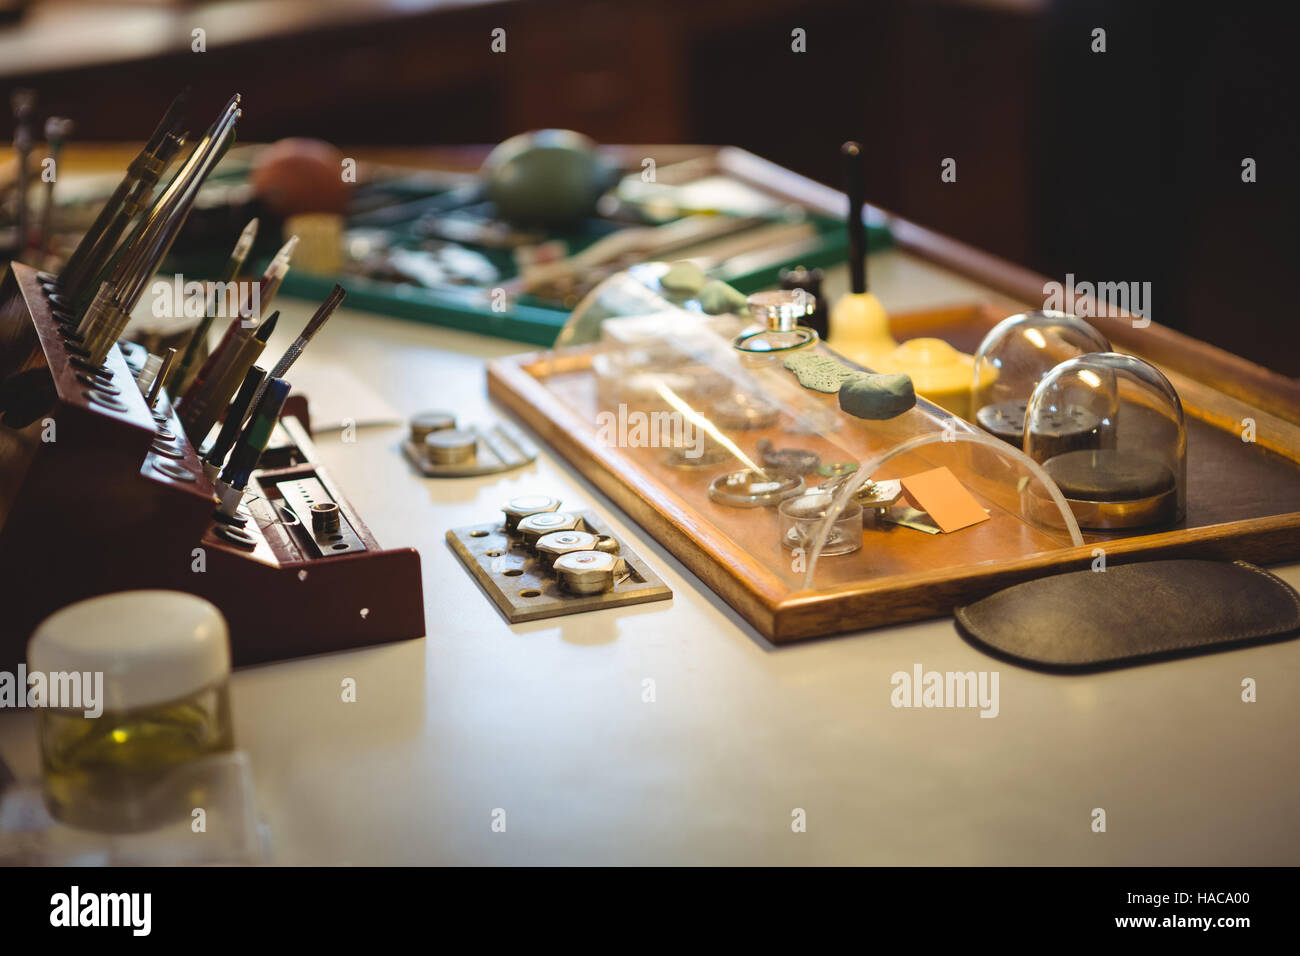 Horologist work tools and equipment on desk Stock Photo